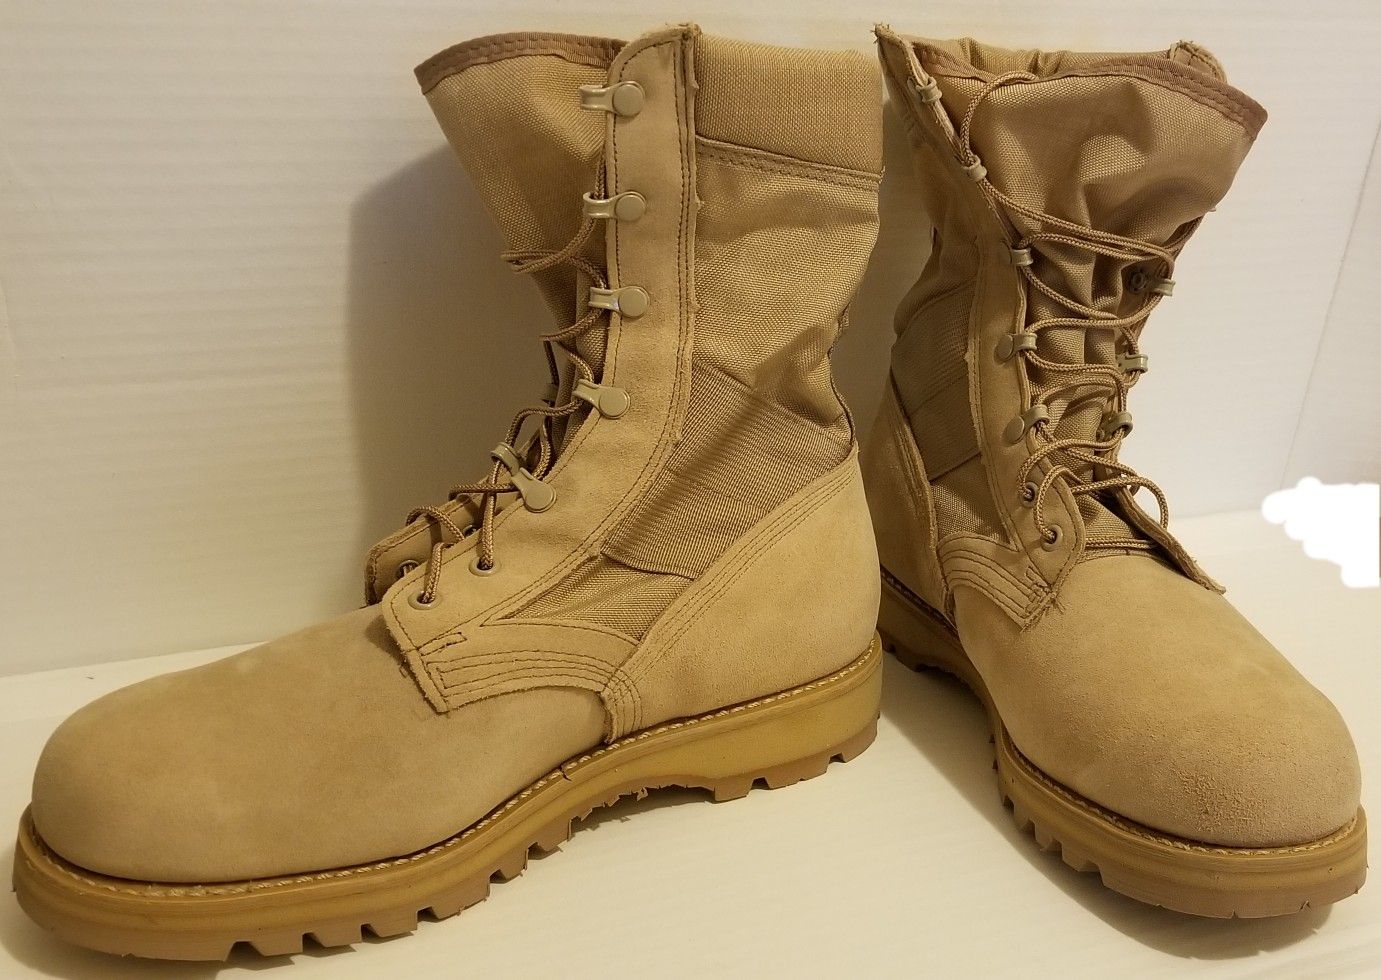 Vibram tan combat boots, hot weather tactical suede cambas 9xw